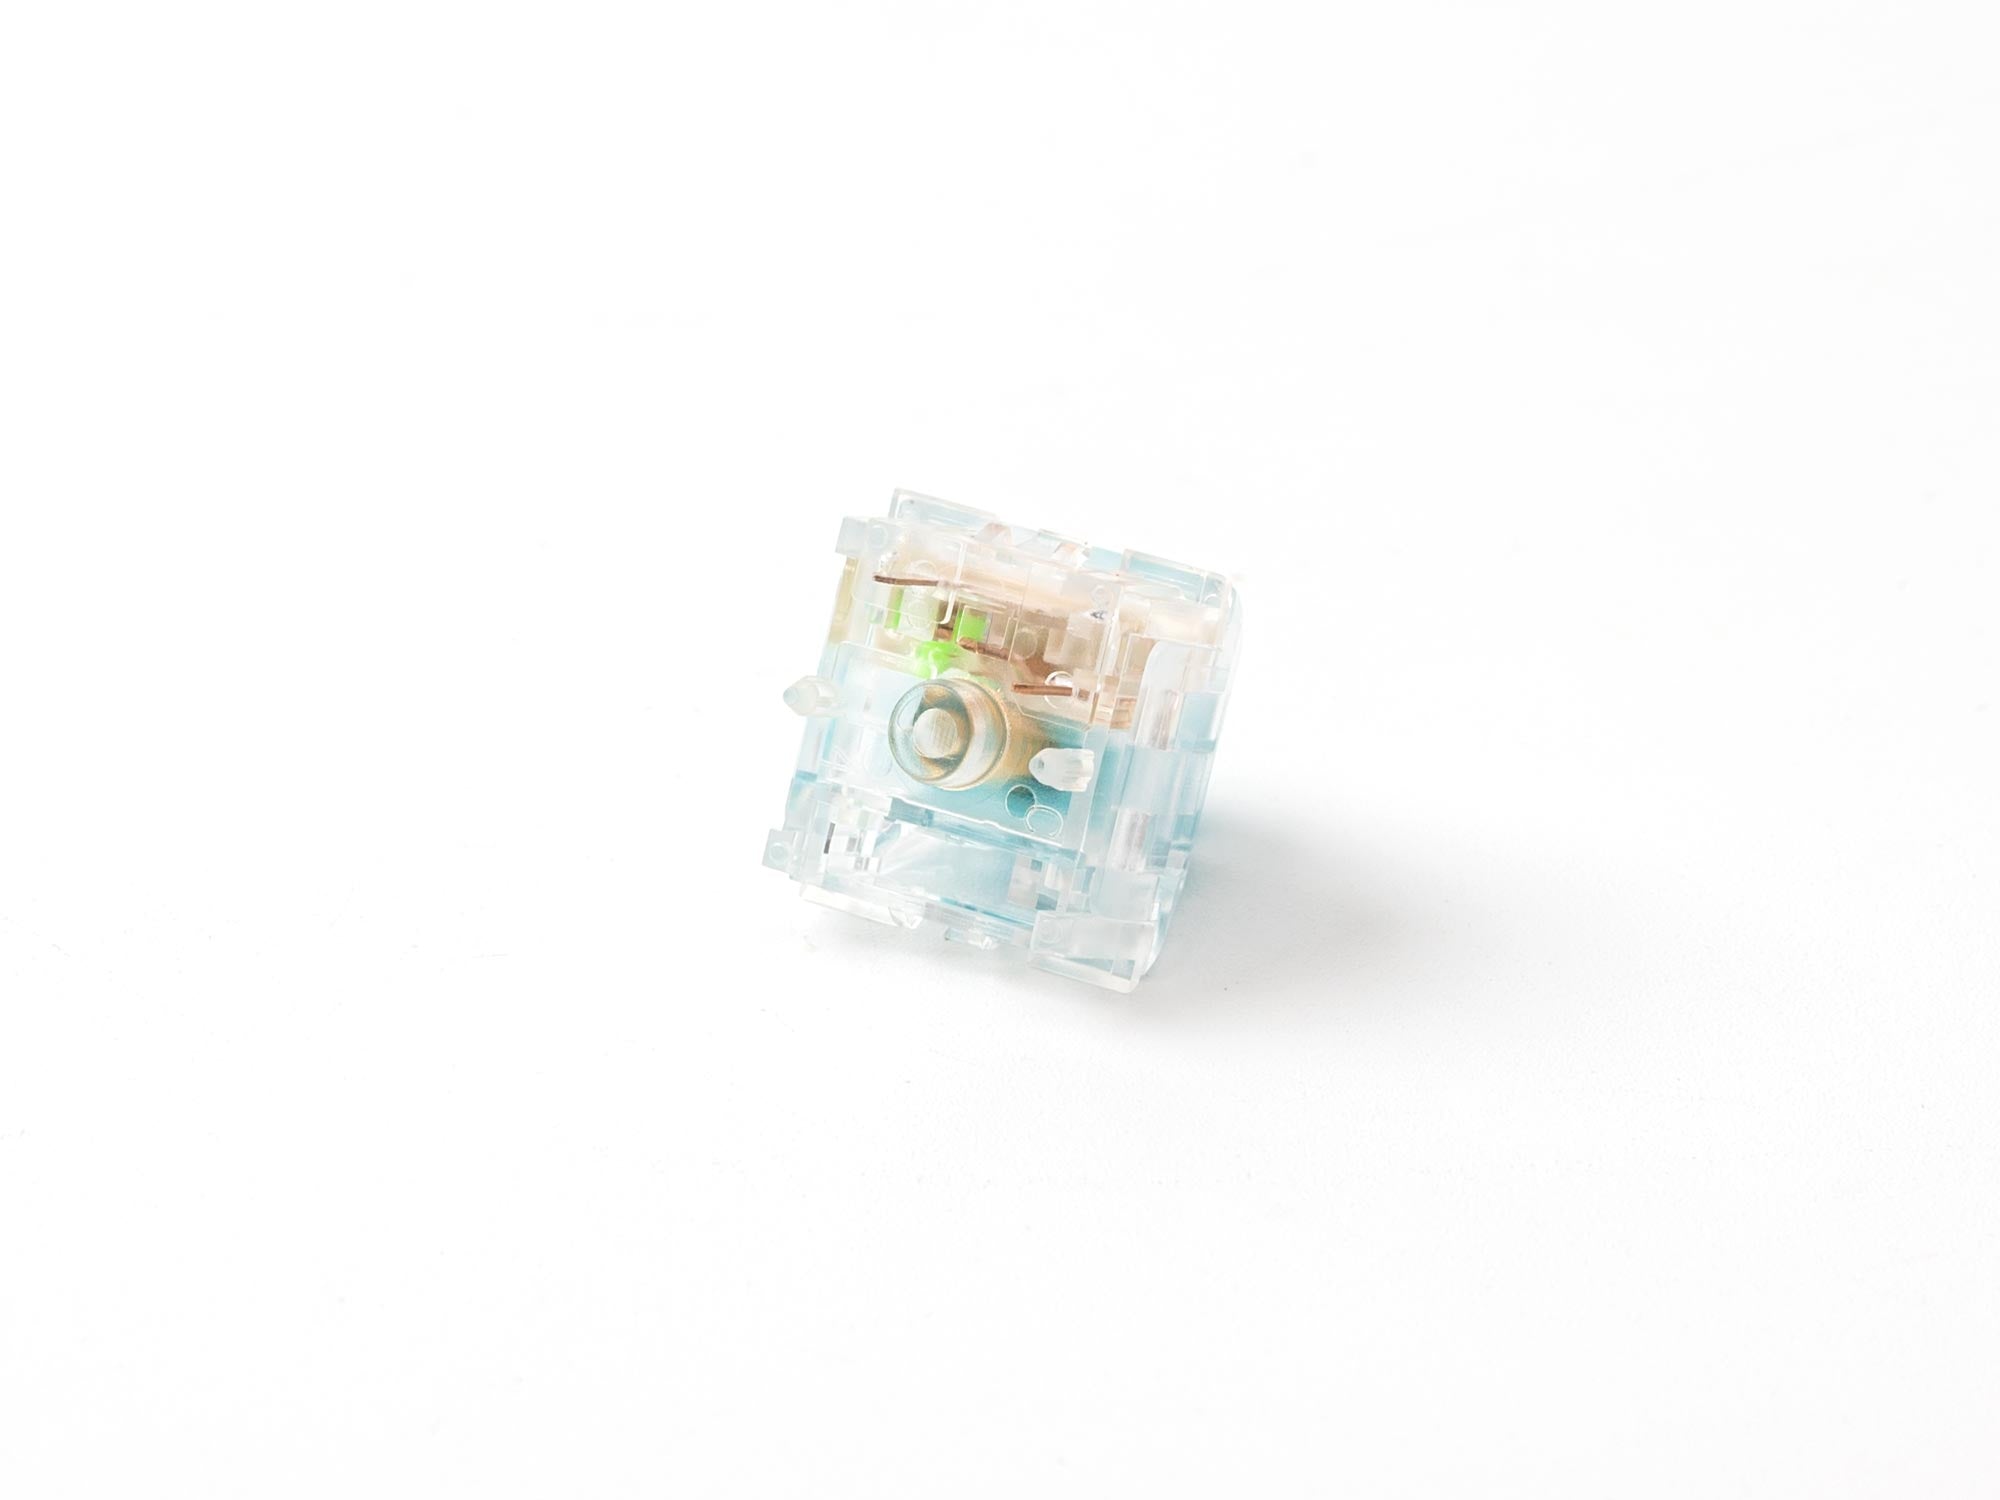 Kailh Crystal Robin Box Switch 5-Pin Structure